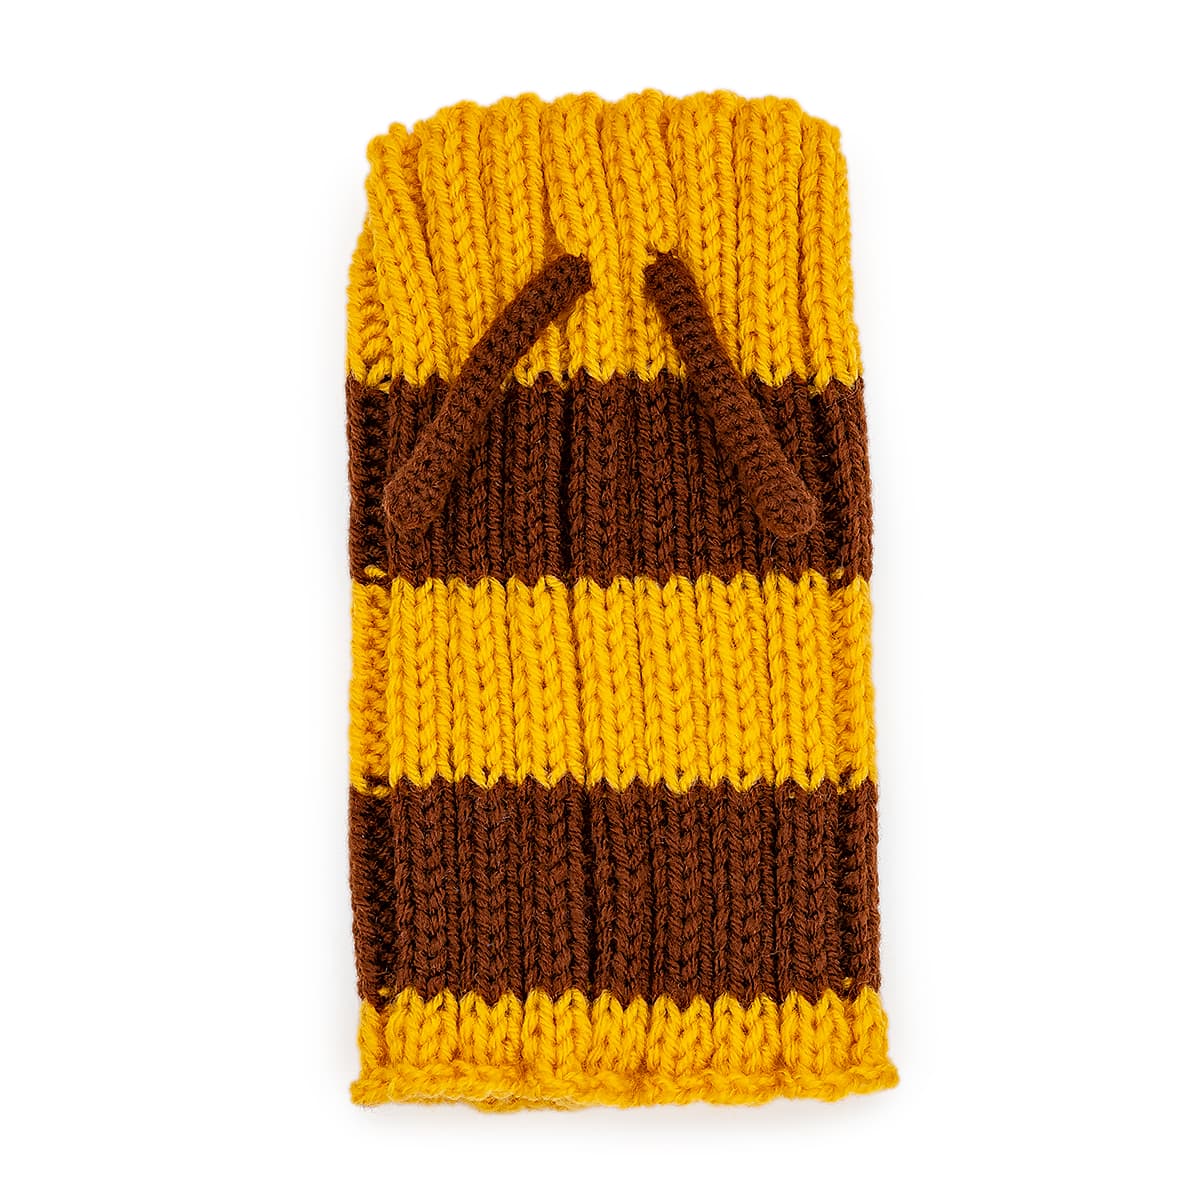 Bumble Bee Zoo Snood Top view